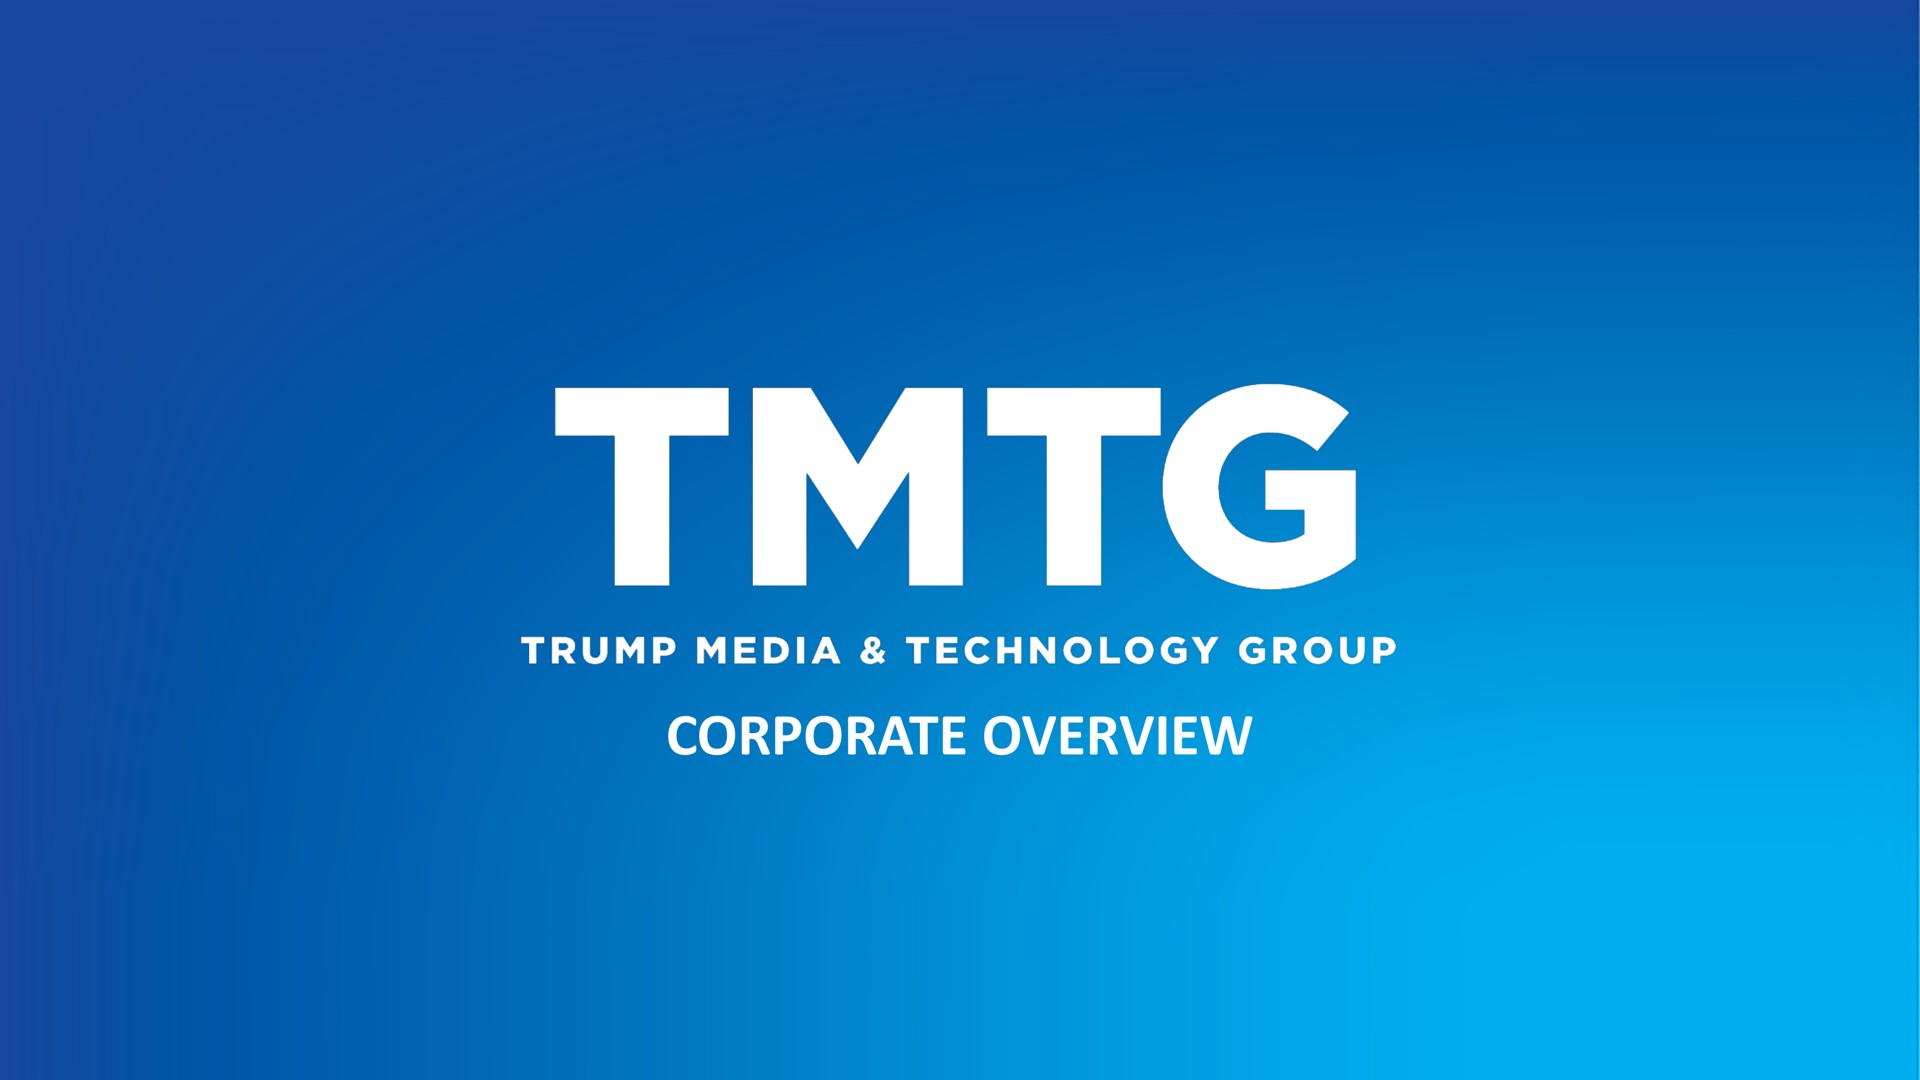 corporate overview trump media technology group | TMTG